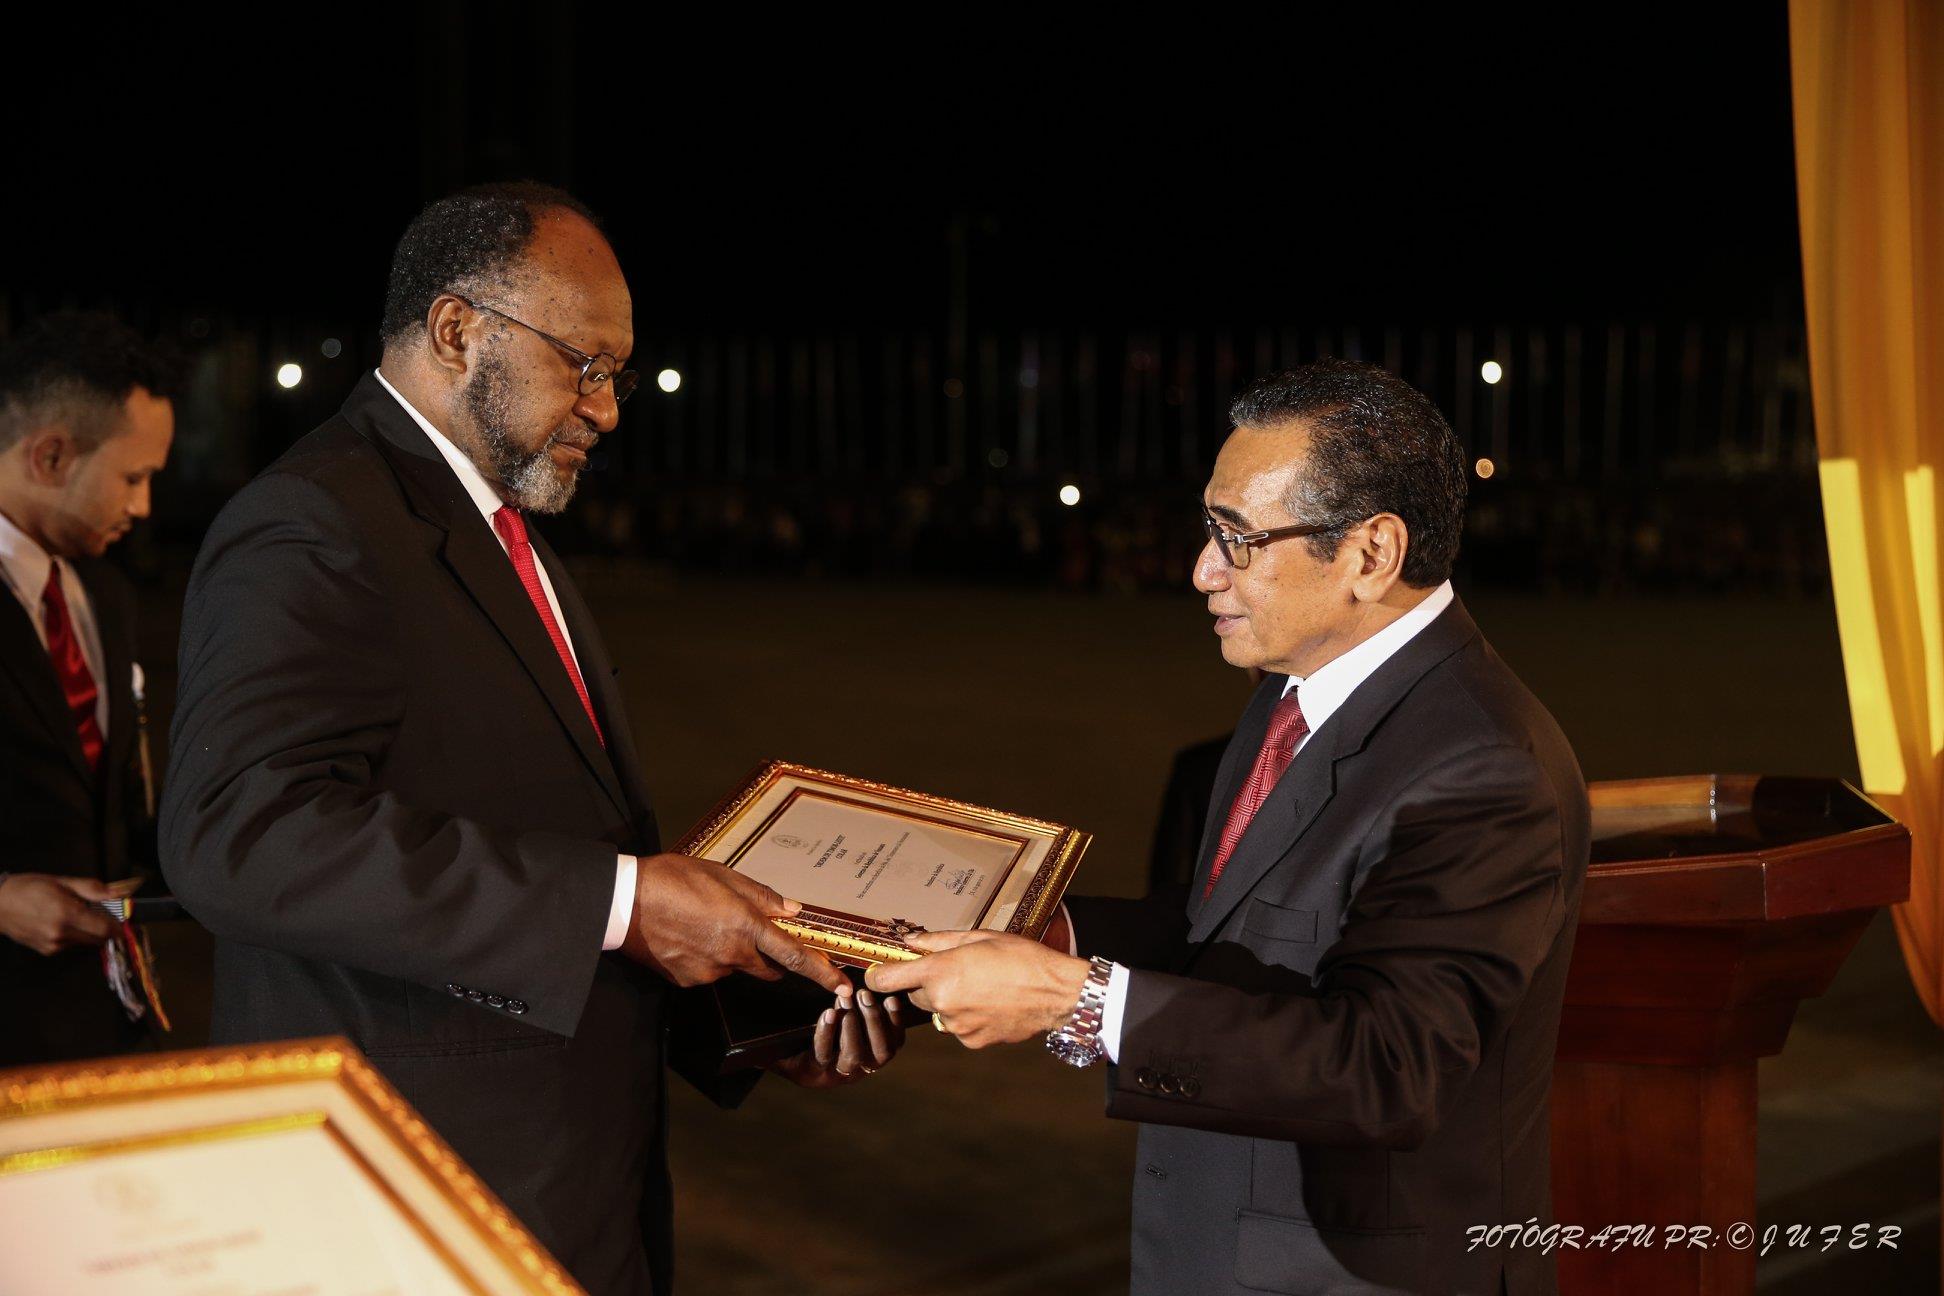 Prime Minister Charlot Salwai accepts award from Timor-Leste President Francisco Guterres Lú Olo on August 30. President Clinton did not attend. 